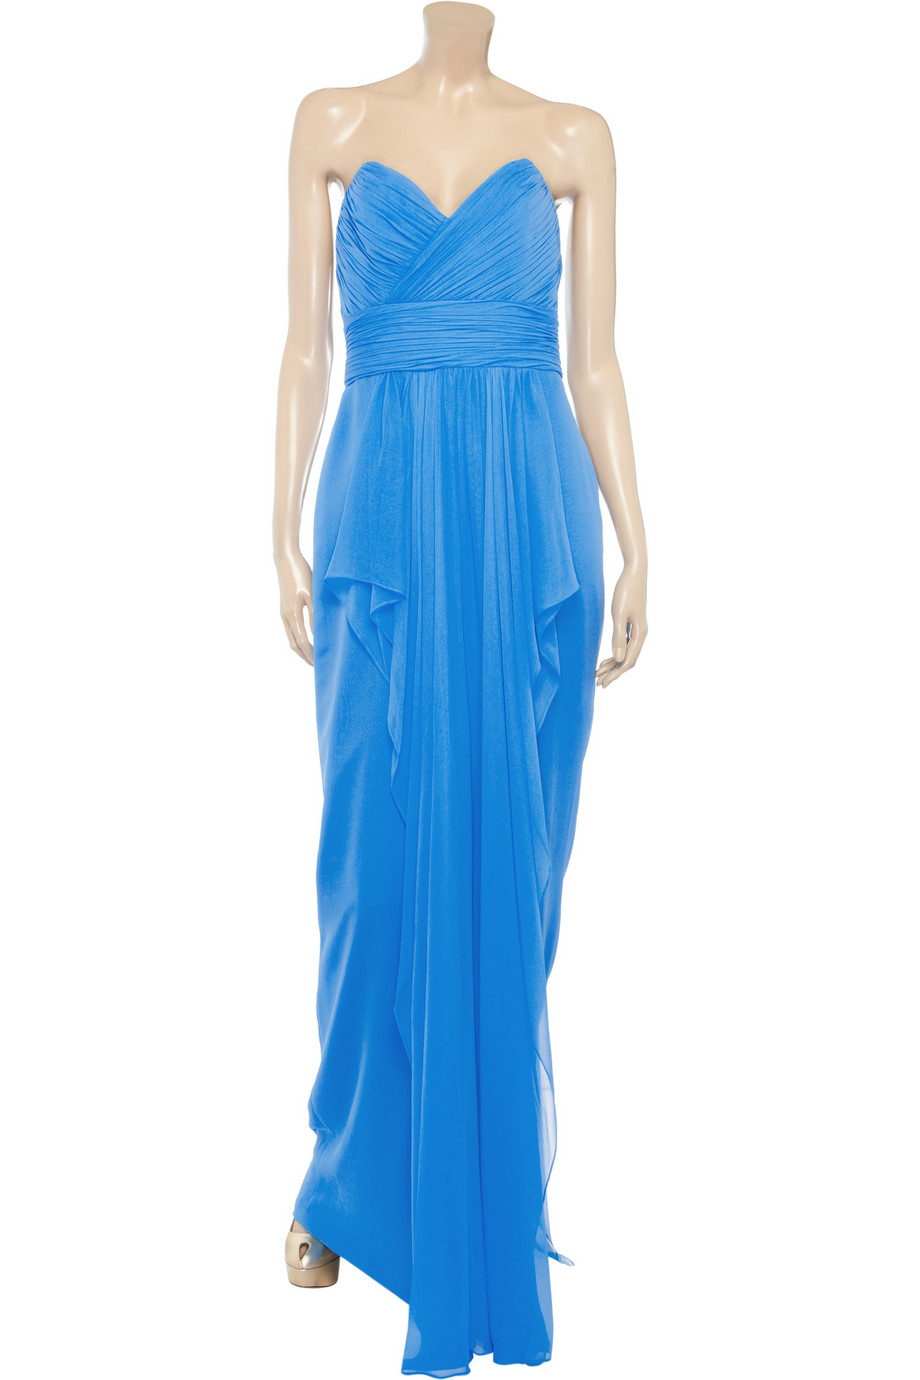 Lyst - Notte By Marchesa Ruched Silk chiffon Gown in Blue